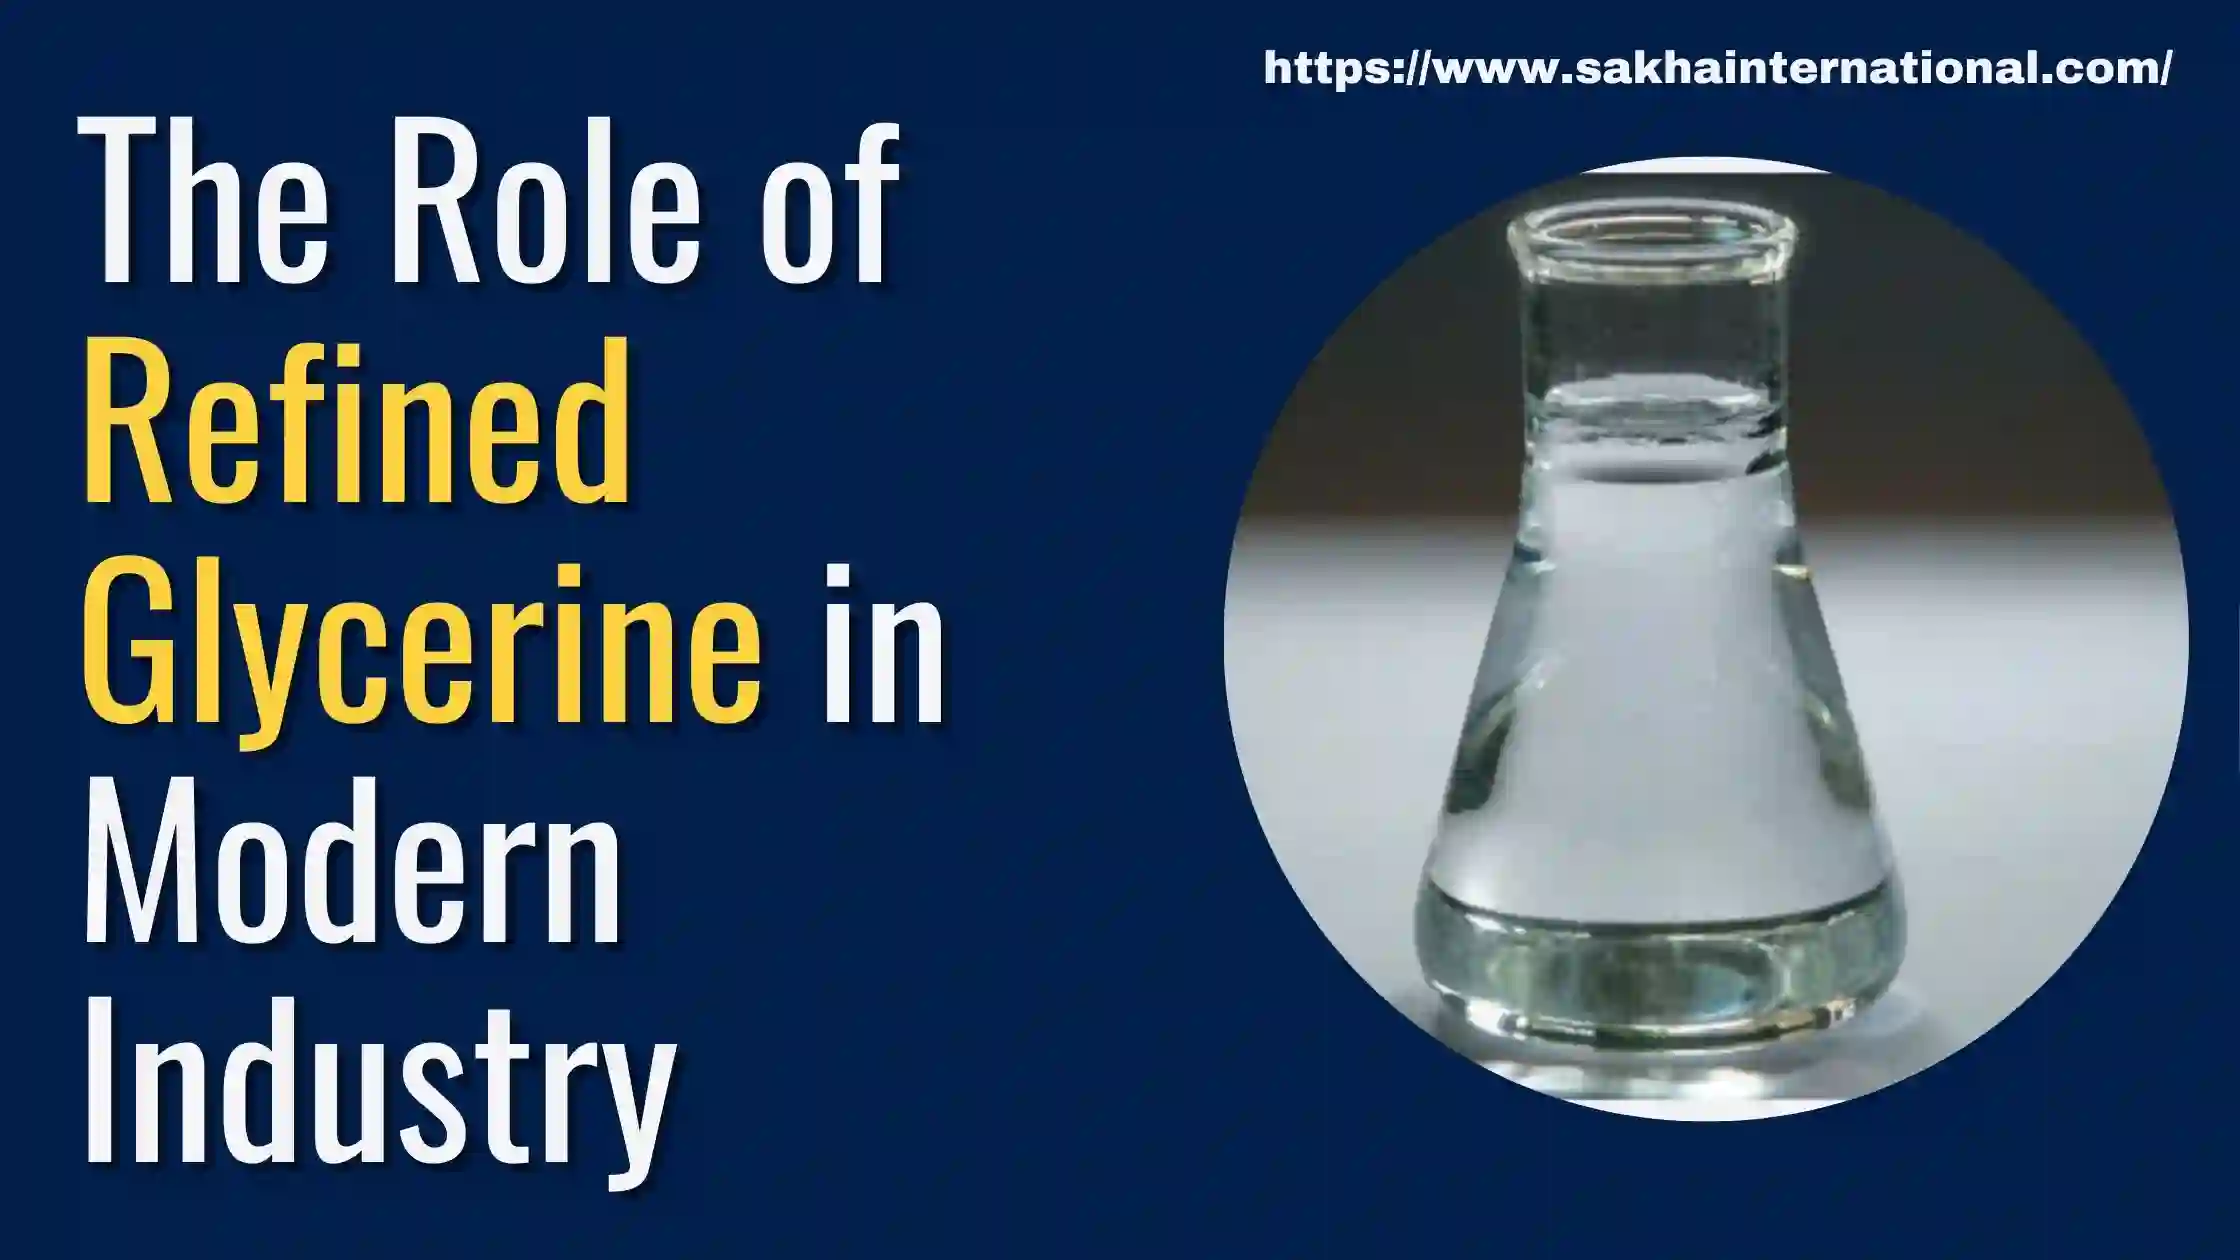 The Role of Refined Glycerine in Modern Industry